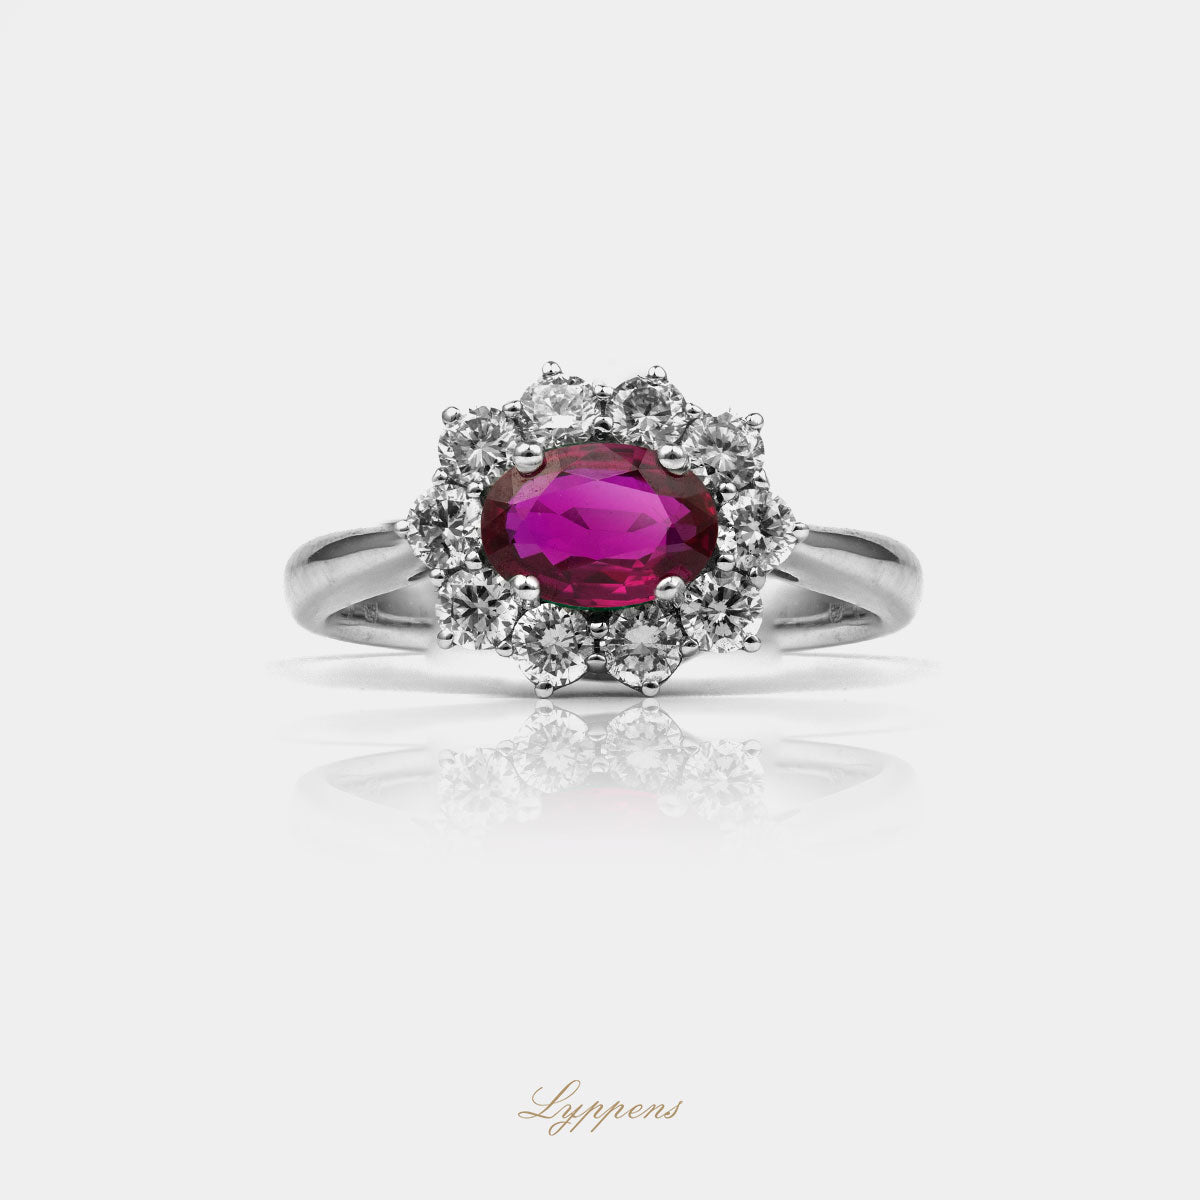 White gold entourage ring with ruby and diamonds